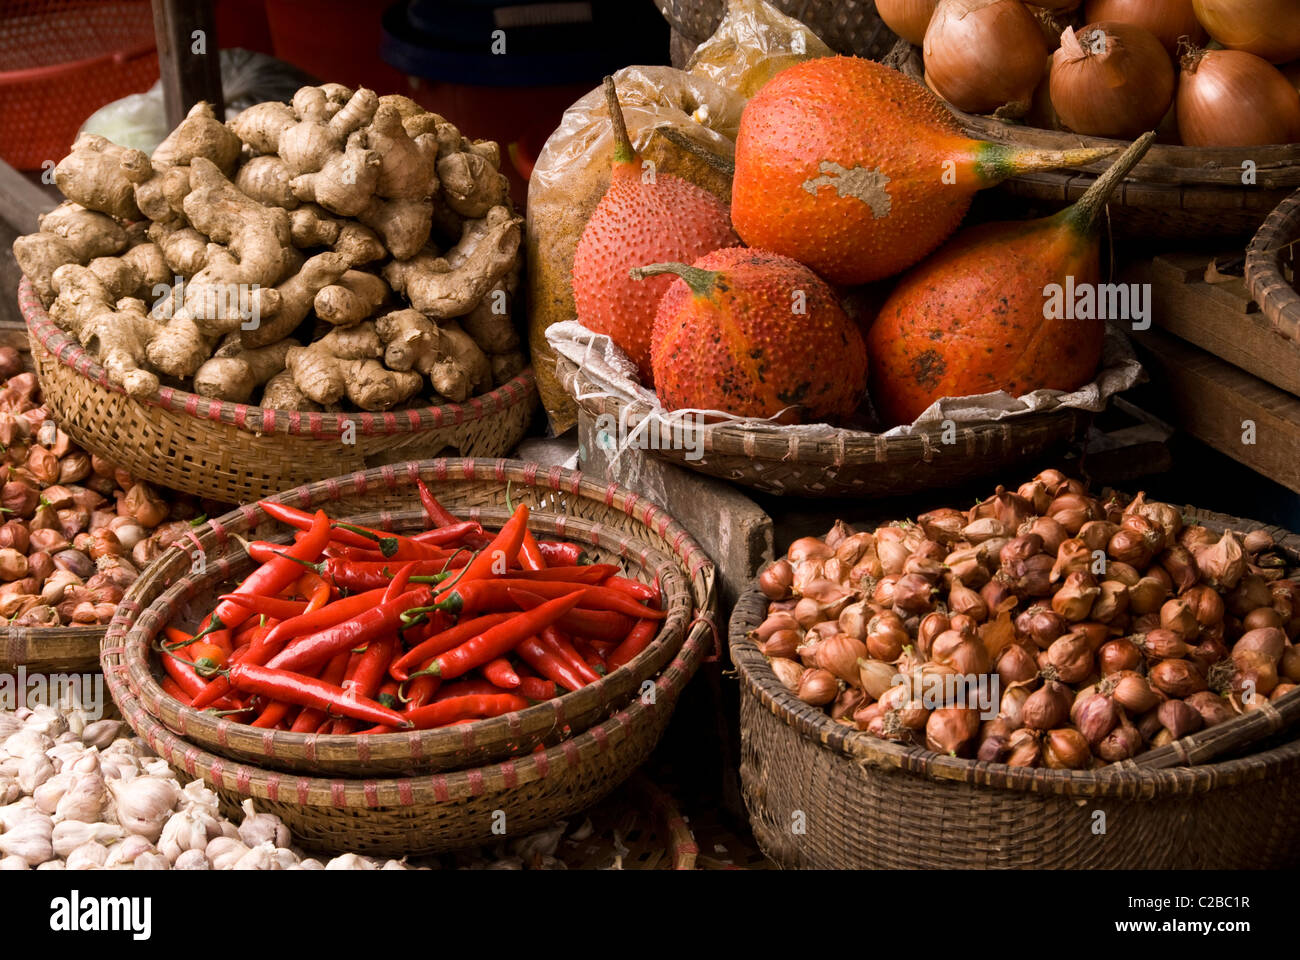 Baskets of gac fruit, chilli, onions, shallots, ginger and garlic at a market in the Hanoi Old Quarter, Viet Nam Stock Photo